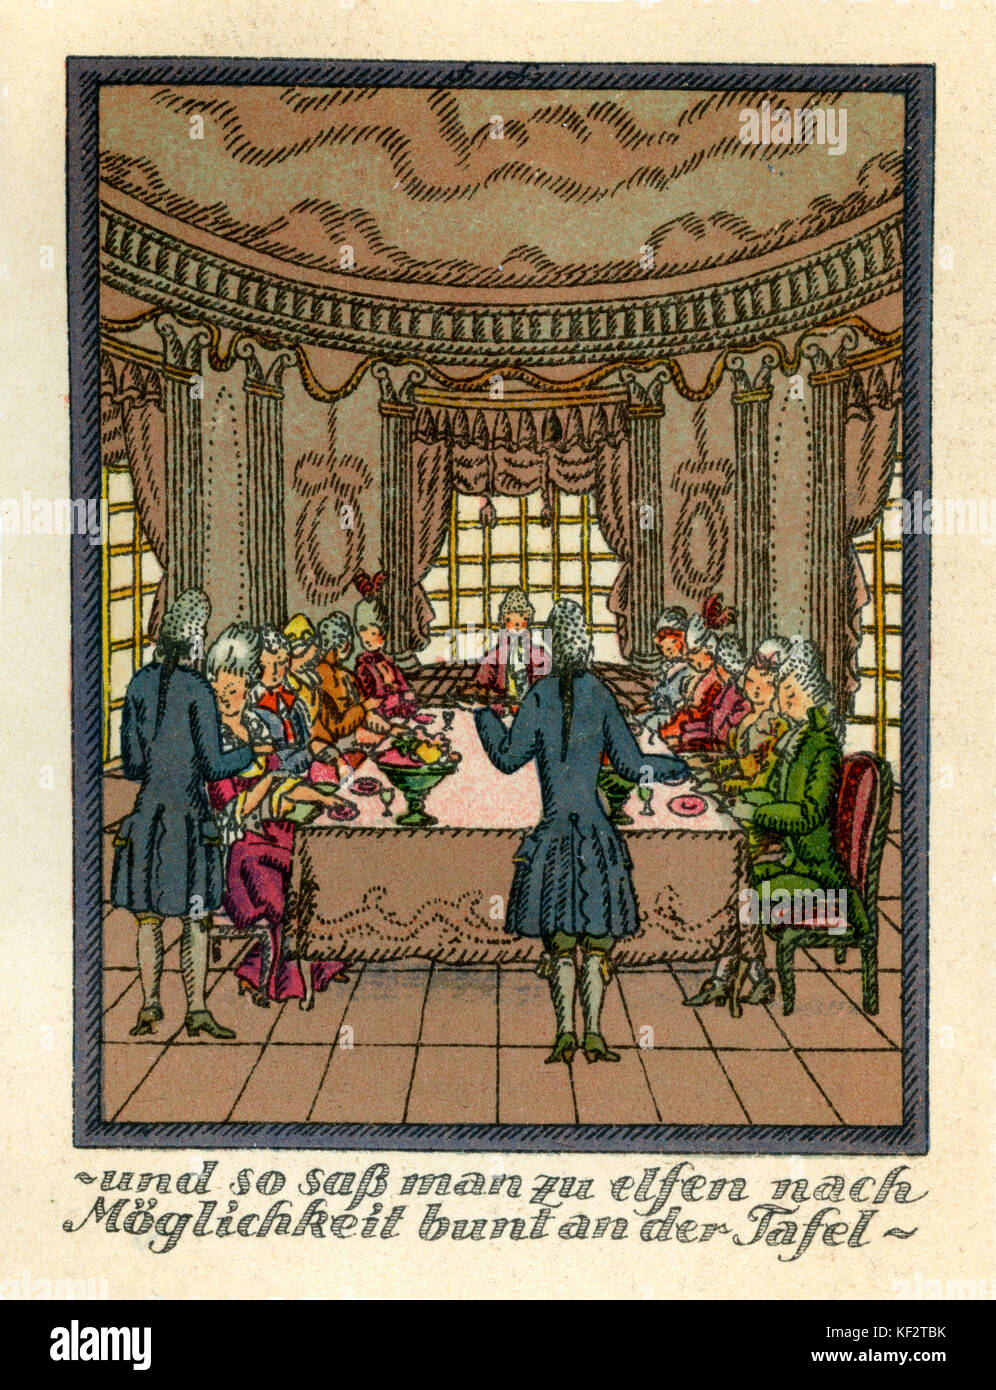 Mozart 's Journey to Prague, 1856.  Fictional account of Mozart's journey with his wife Constanze in Autumn 1787 to Prague, where his opera Don Giovanni was to premiere. Caption reads: ' und so saß man zu elfen nach Möglichkeiten bunt an der Tafel' [  and so they sat as eleven, as colourfully as it was possible, at the table']. Mozart and Constanze at dinner in the Schinzberg manor house.  EM:  German romantic poet and author, 8 September 1804 – 4 June 1875. WAM: Austrian composer, 27 January 1756 - 5 December 1791. Stock Photo